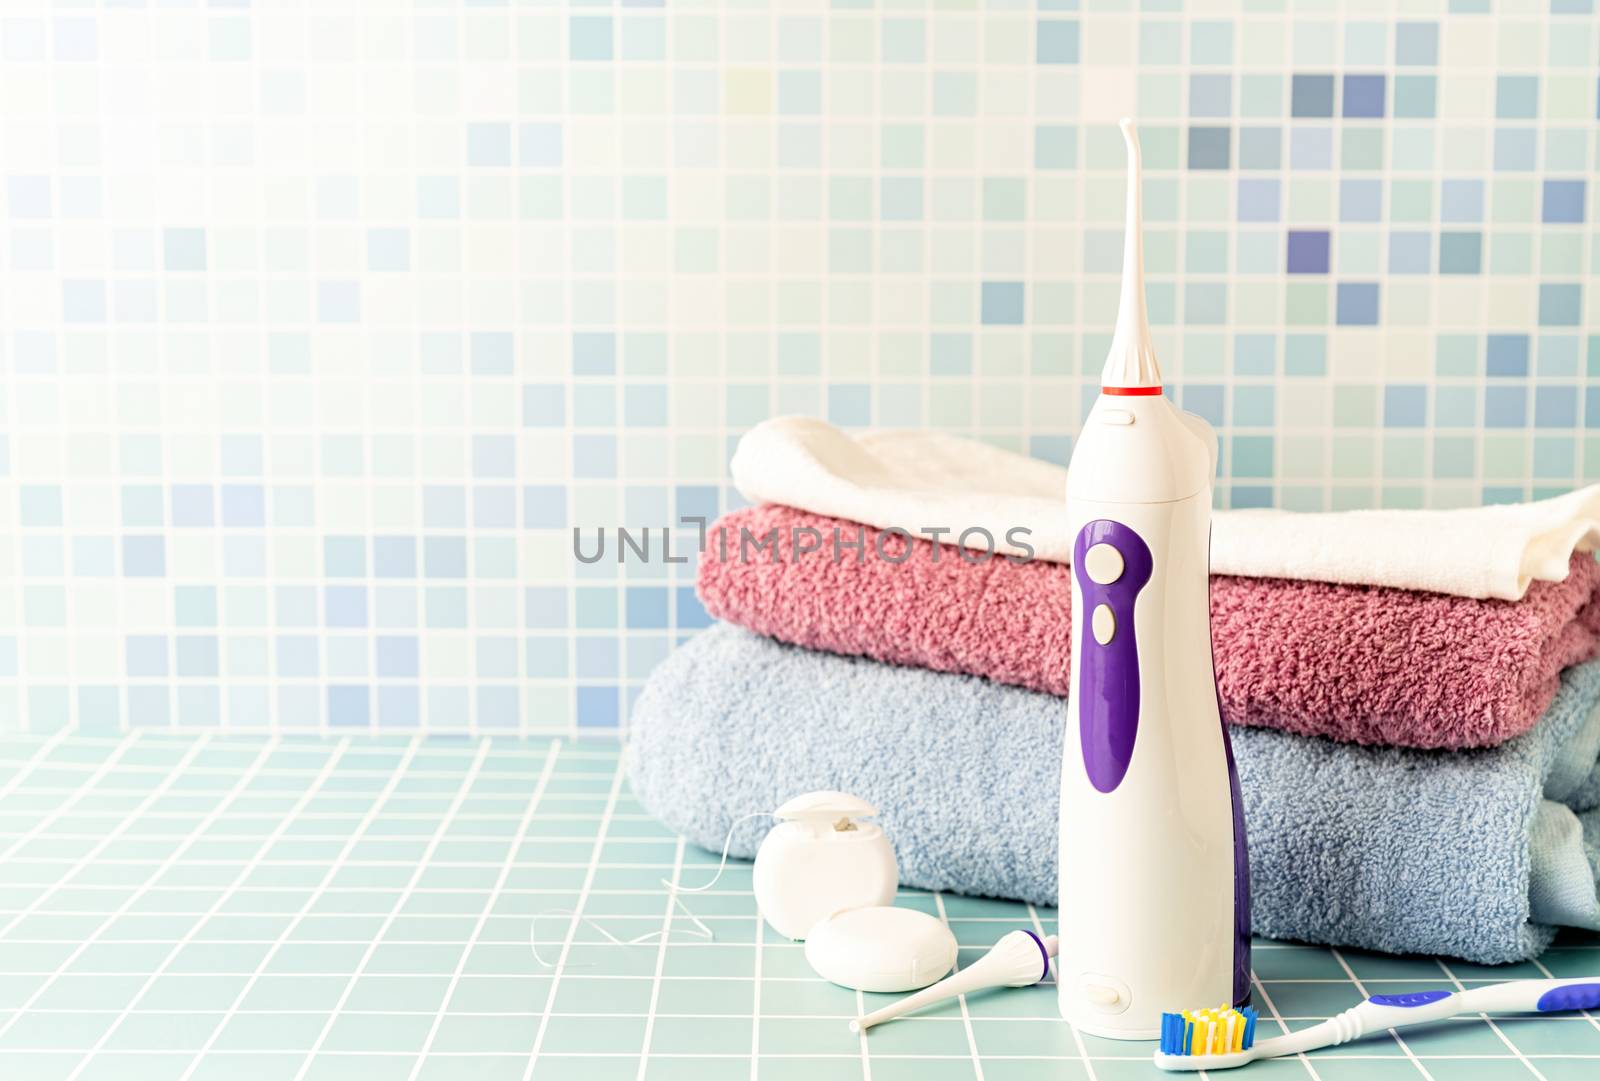 Oral hygiene, dental care. Electronic tooth irrigator, toothbrushes and a pile of towels front view copy space